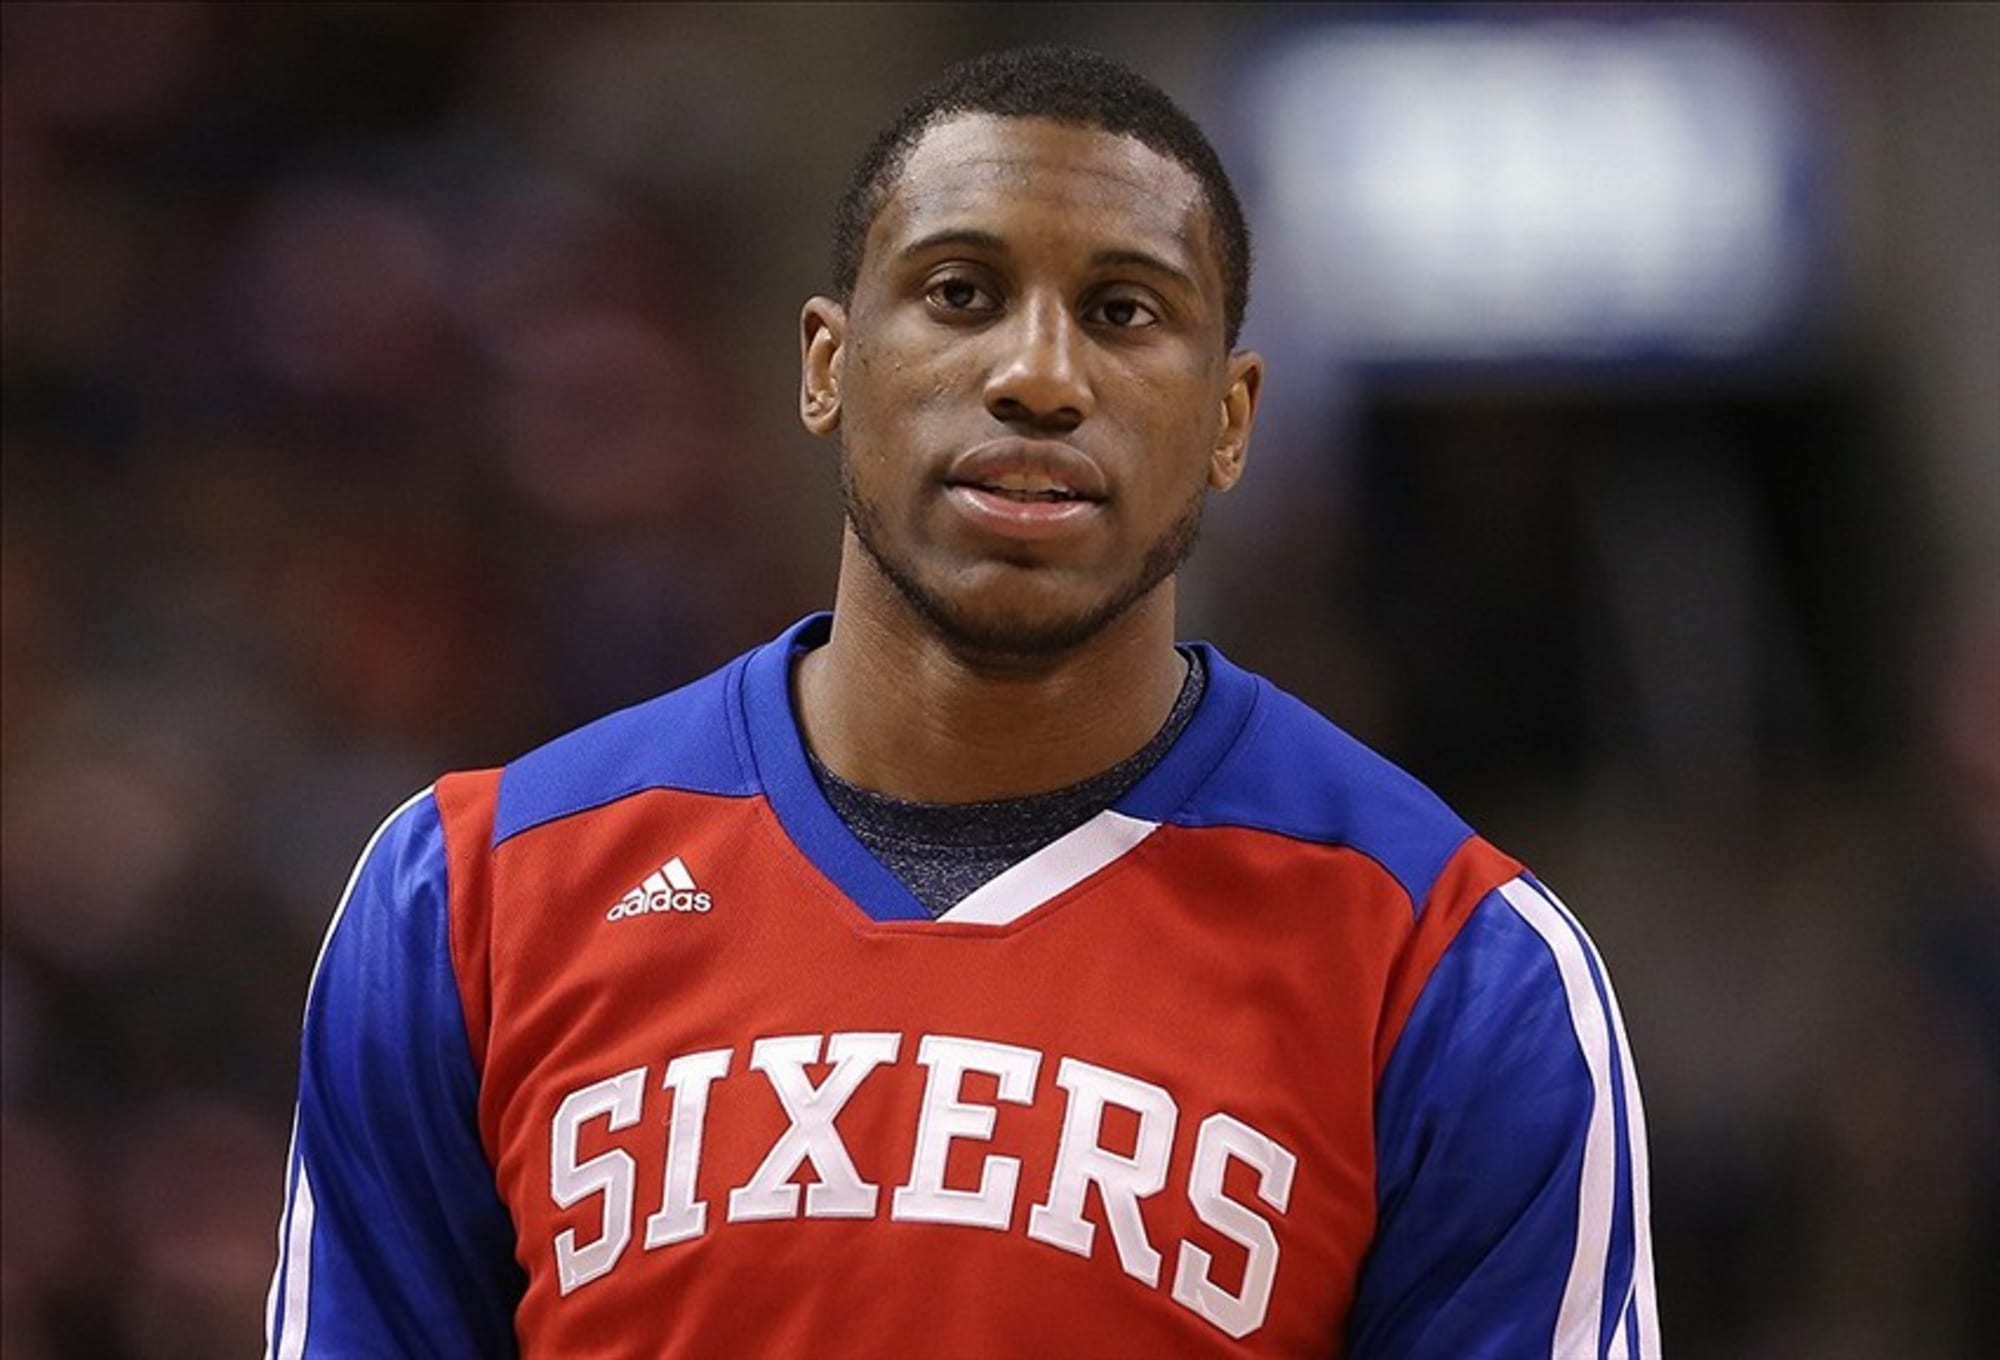 Sixers Notes: Sixers' Thaddeus Young still not with team